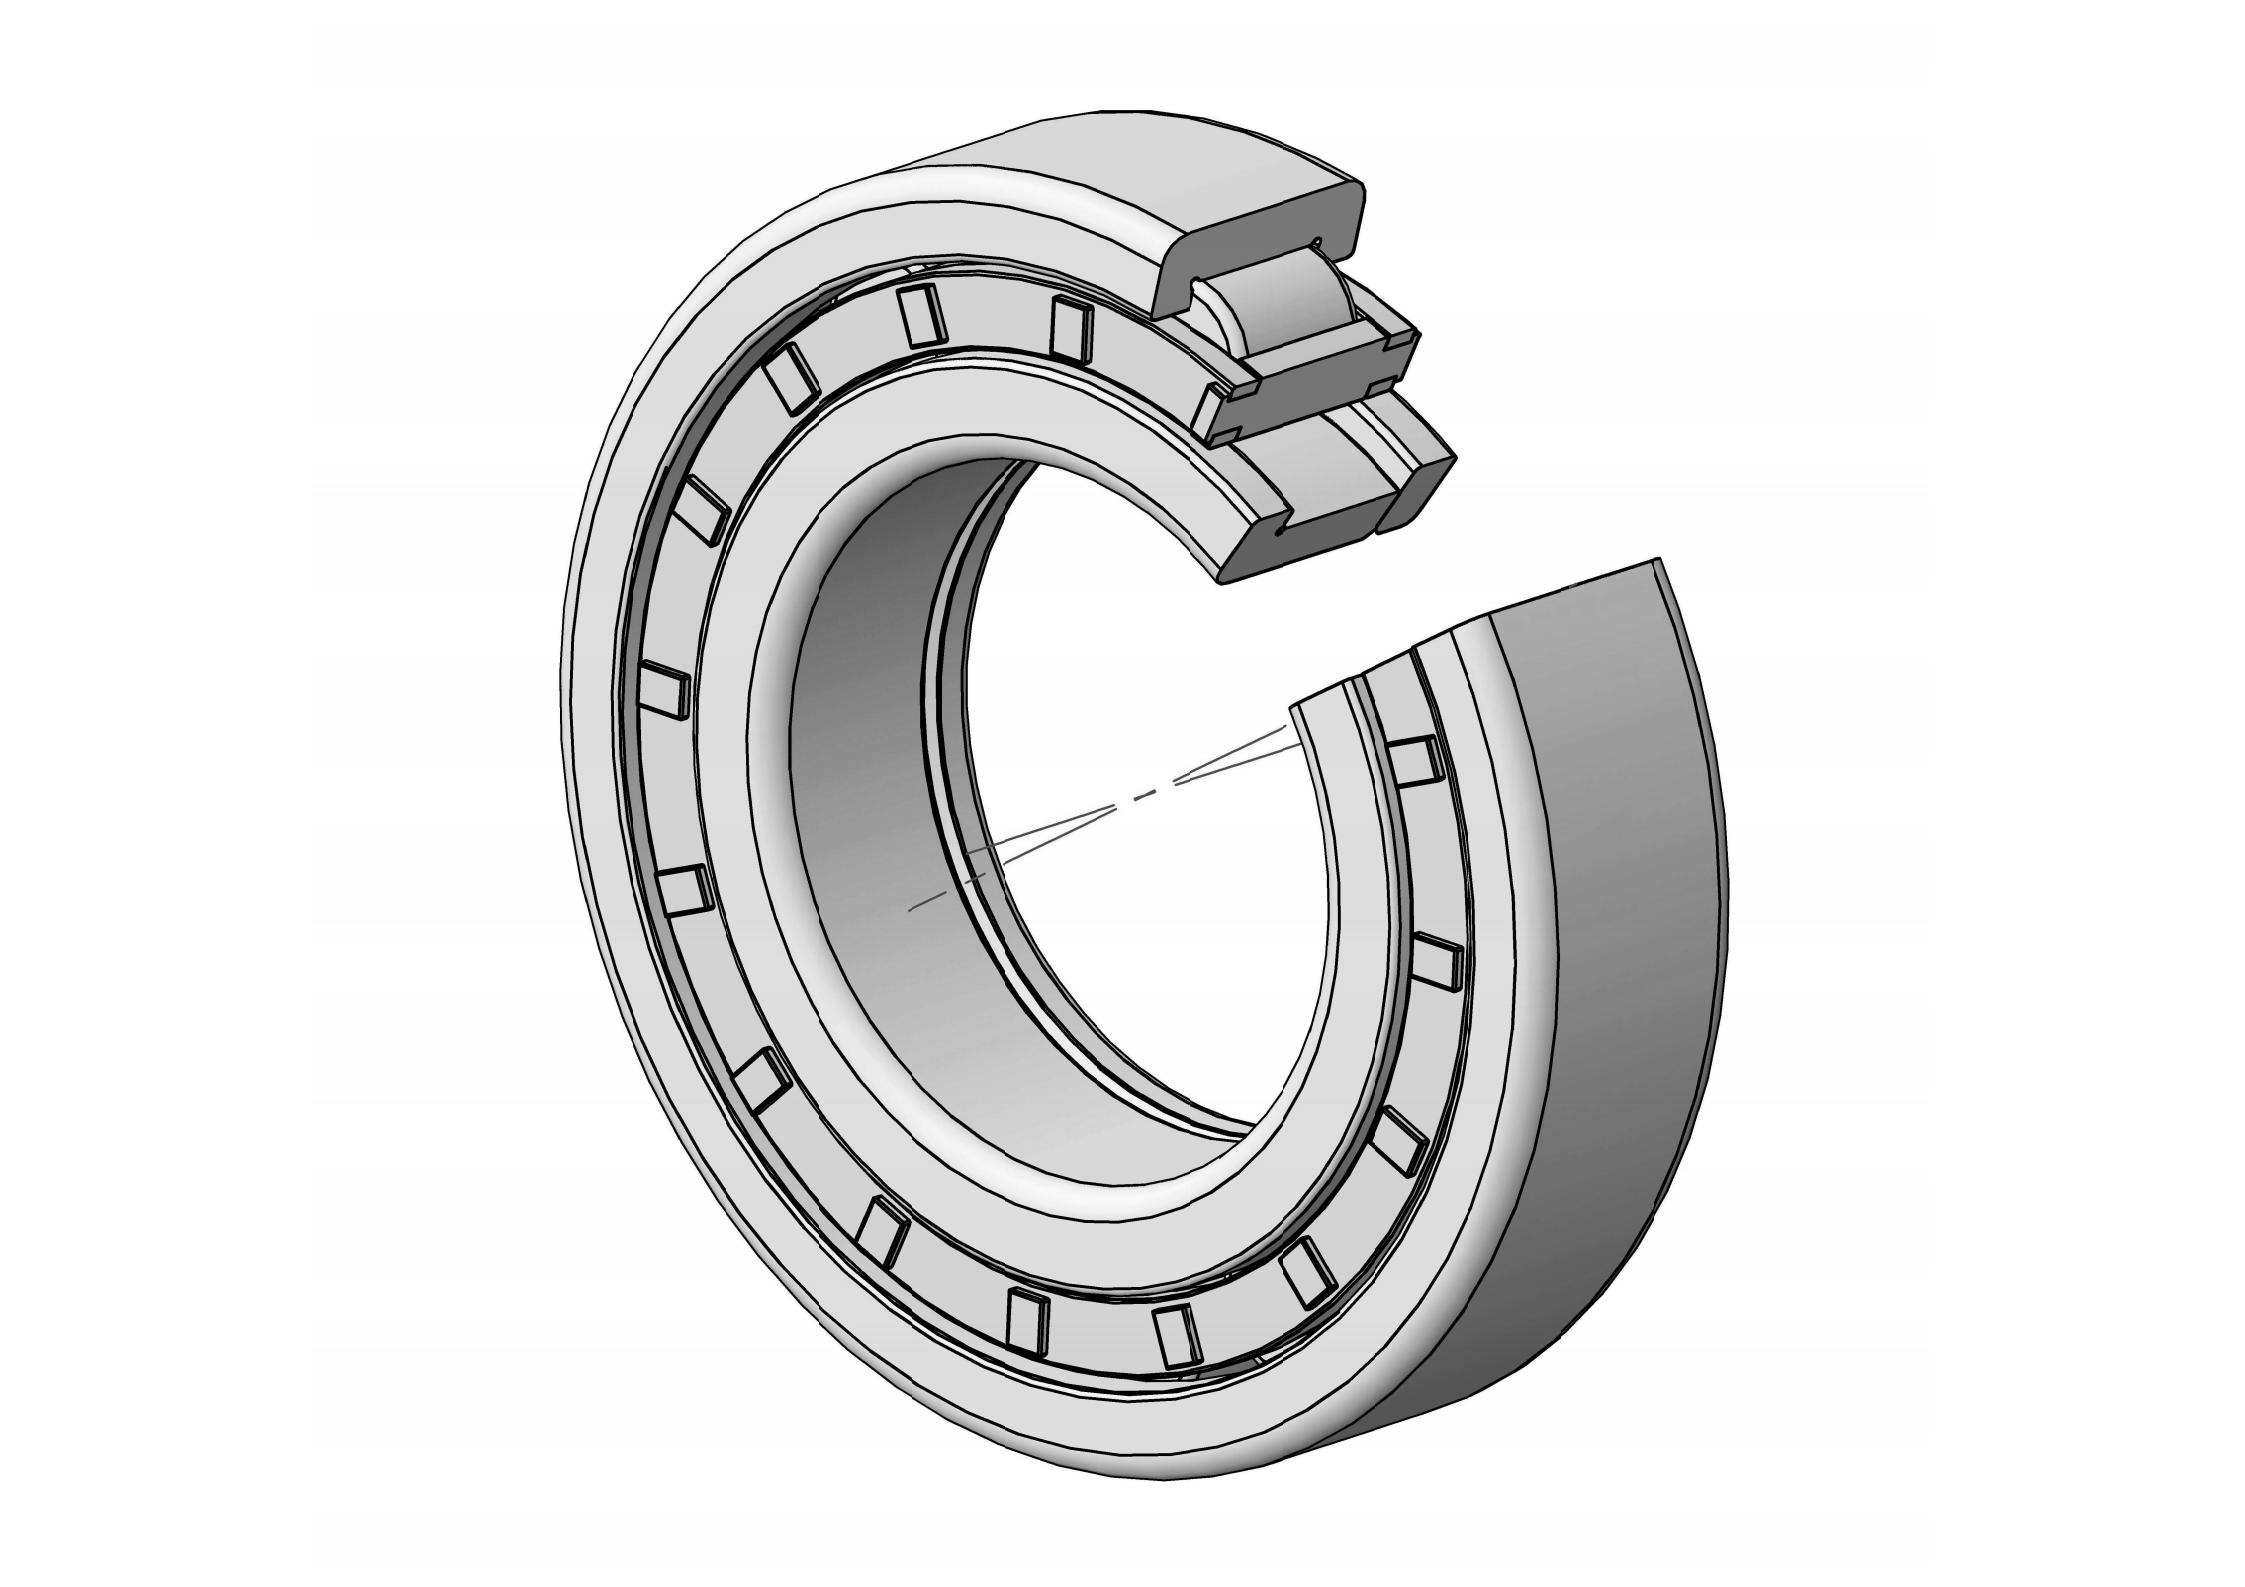 NUP2326-EM Single Row Cylindrical roller bearing 